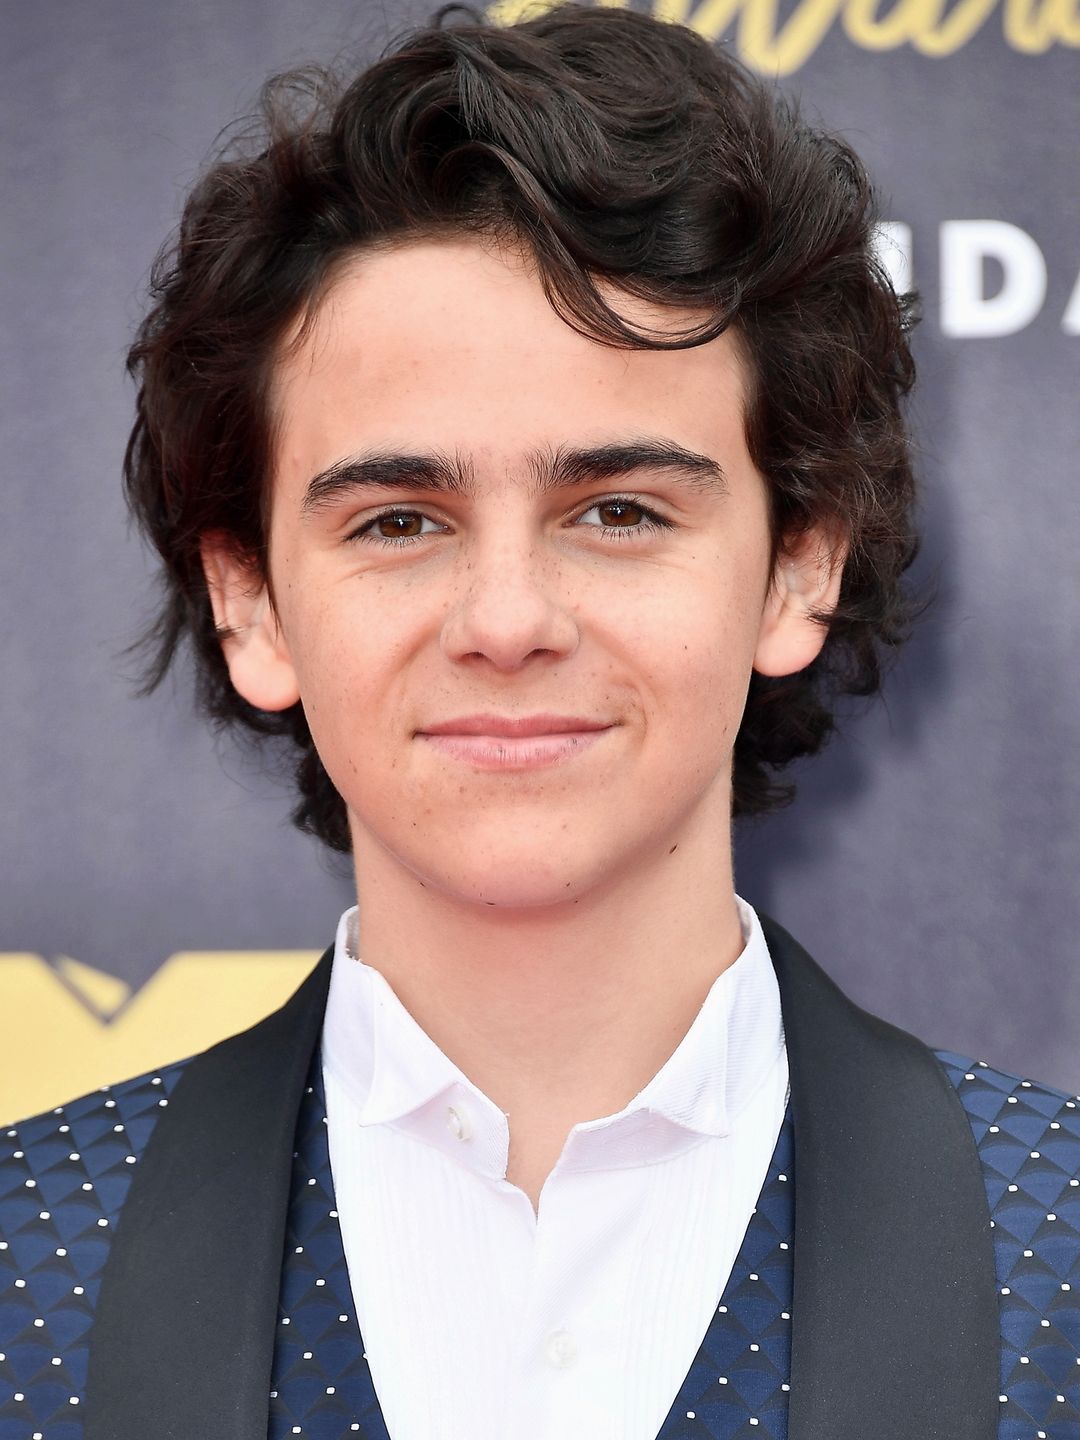 Jack Grazer young age